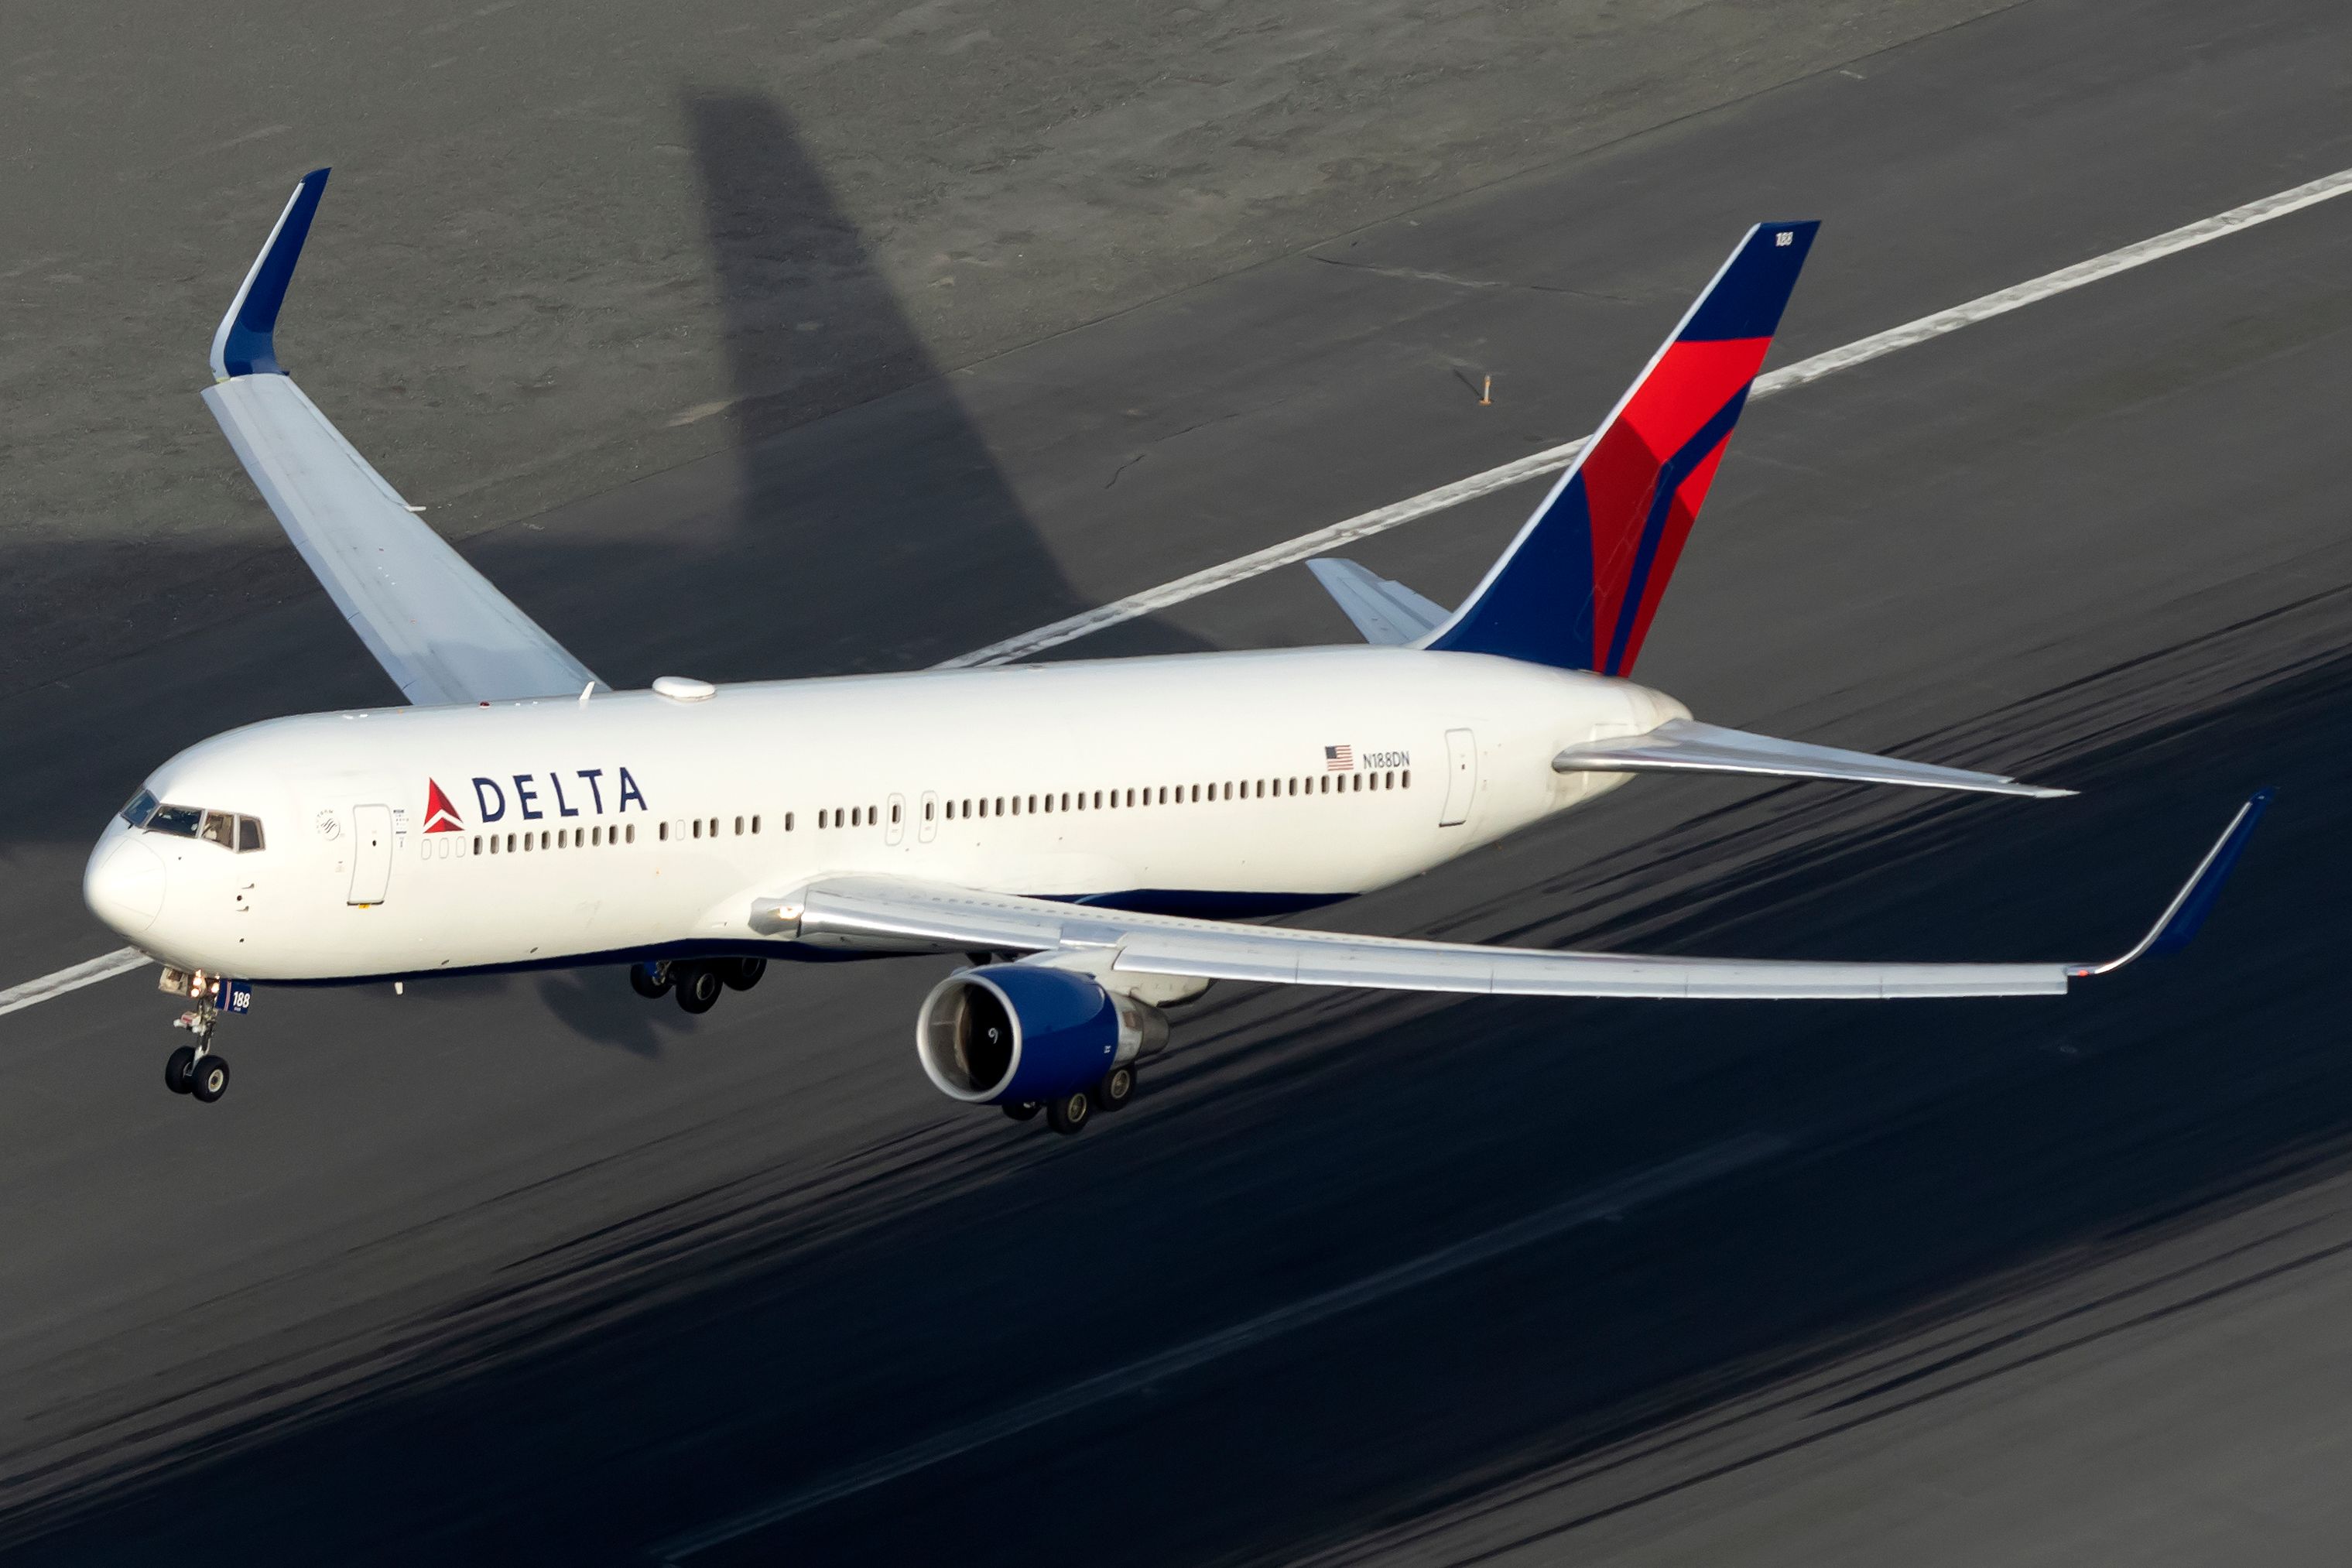 Delta Air Lines Boeing 767-300 Suffers Damage From Hailstorm